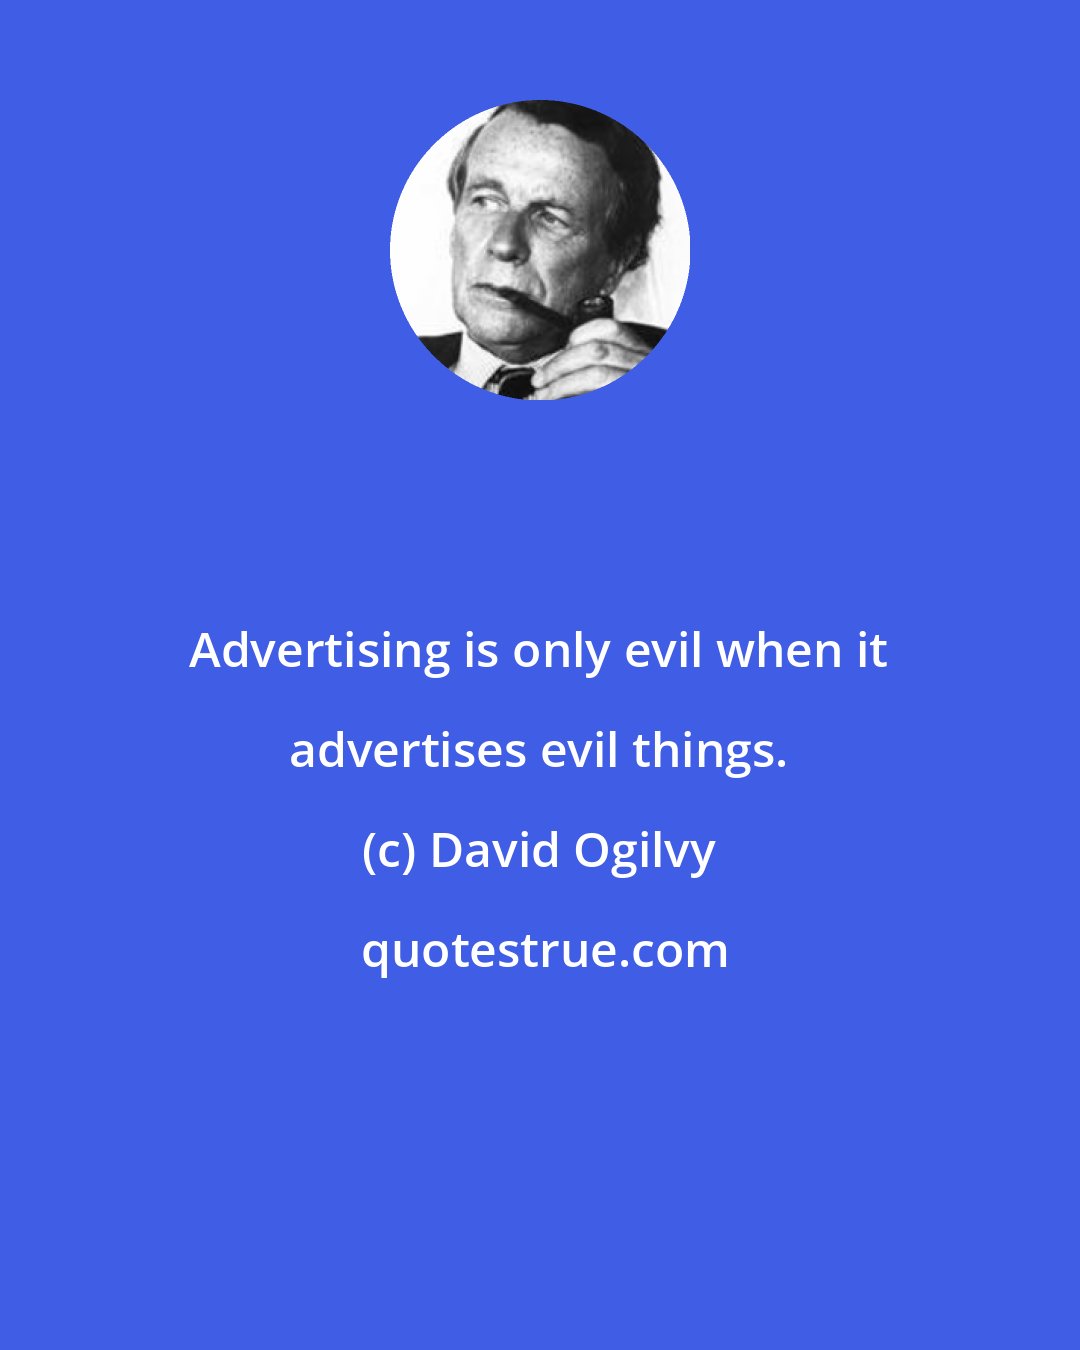 David Ogilvy: Advertising is only evil when it advertises evil things.